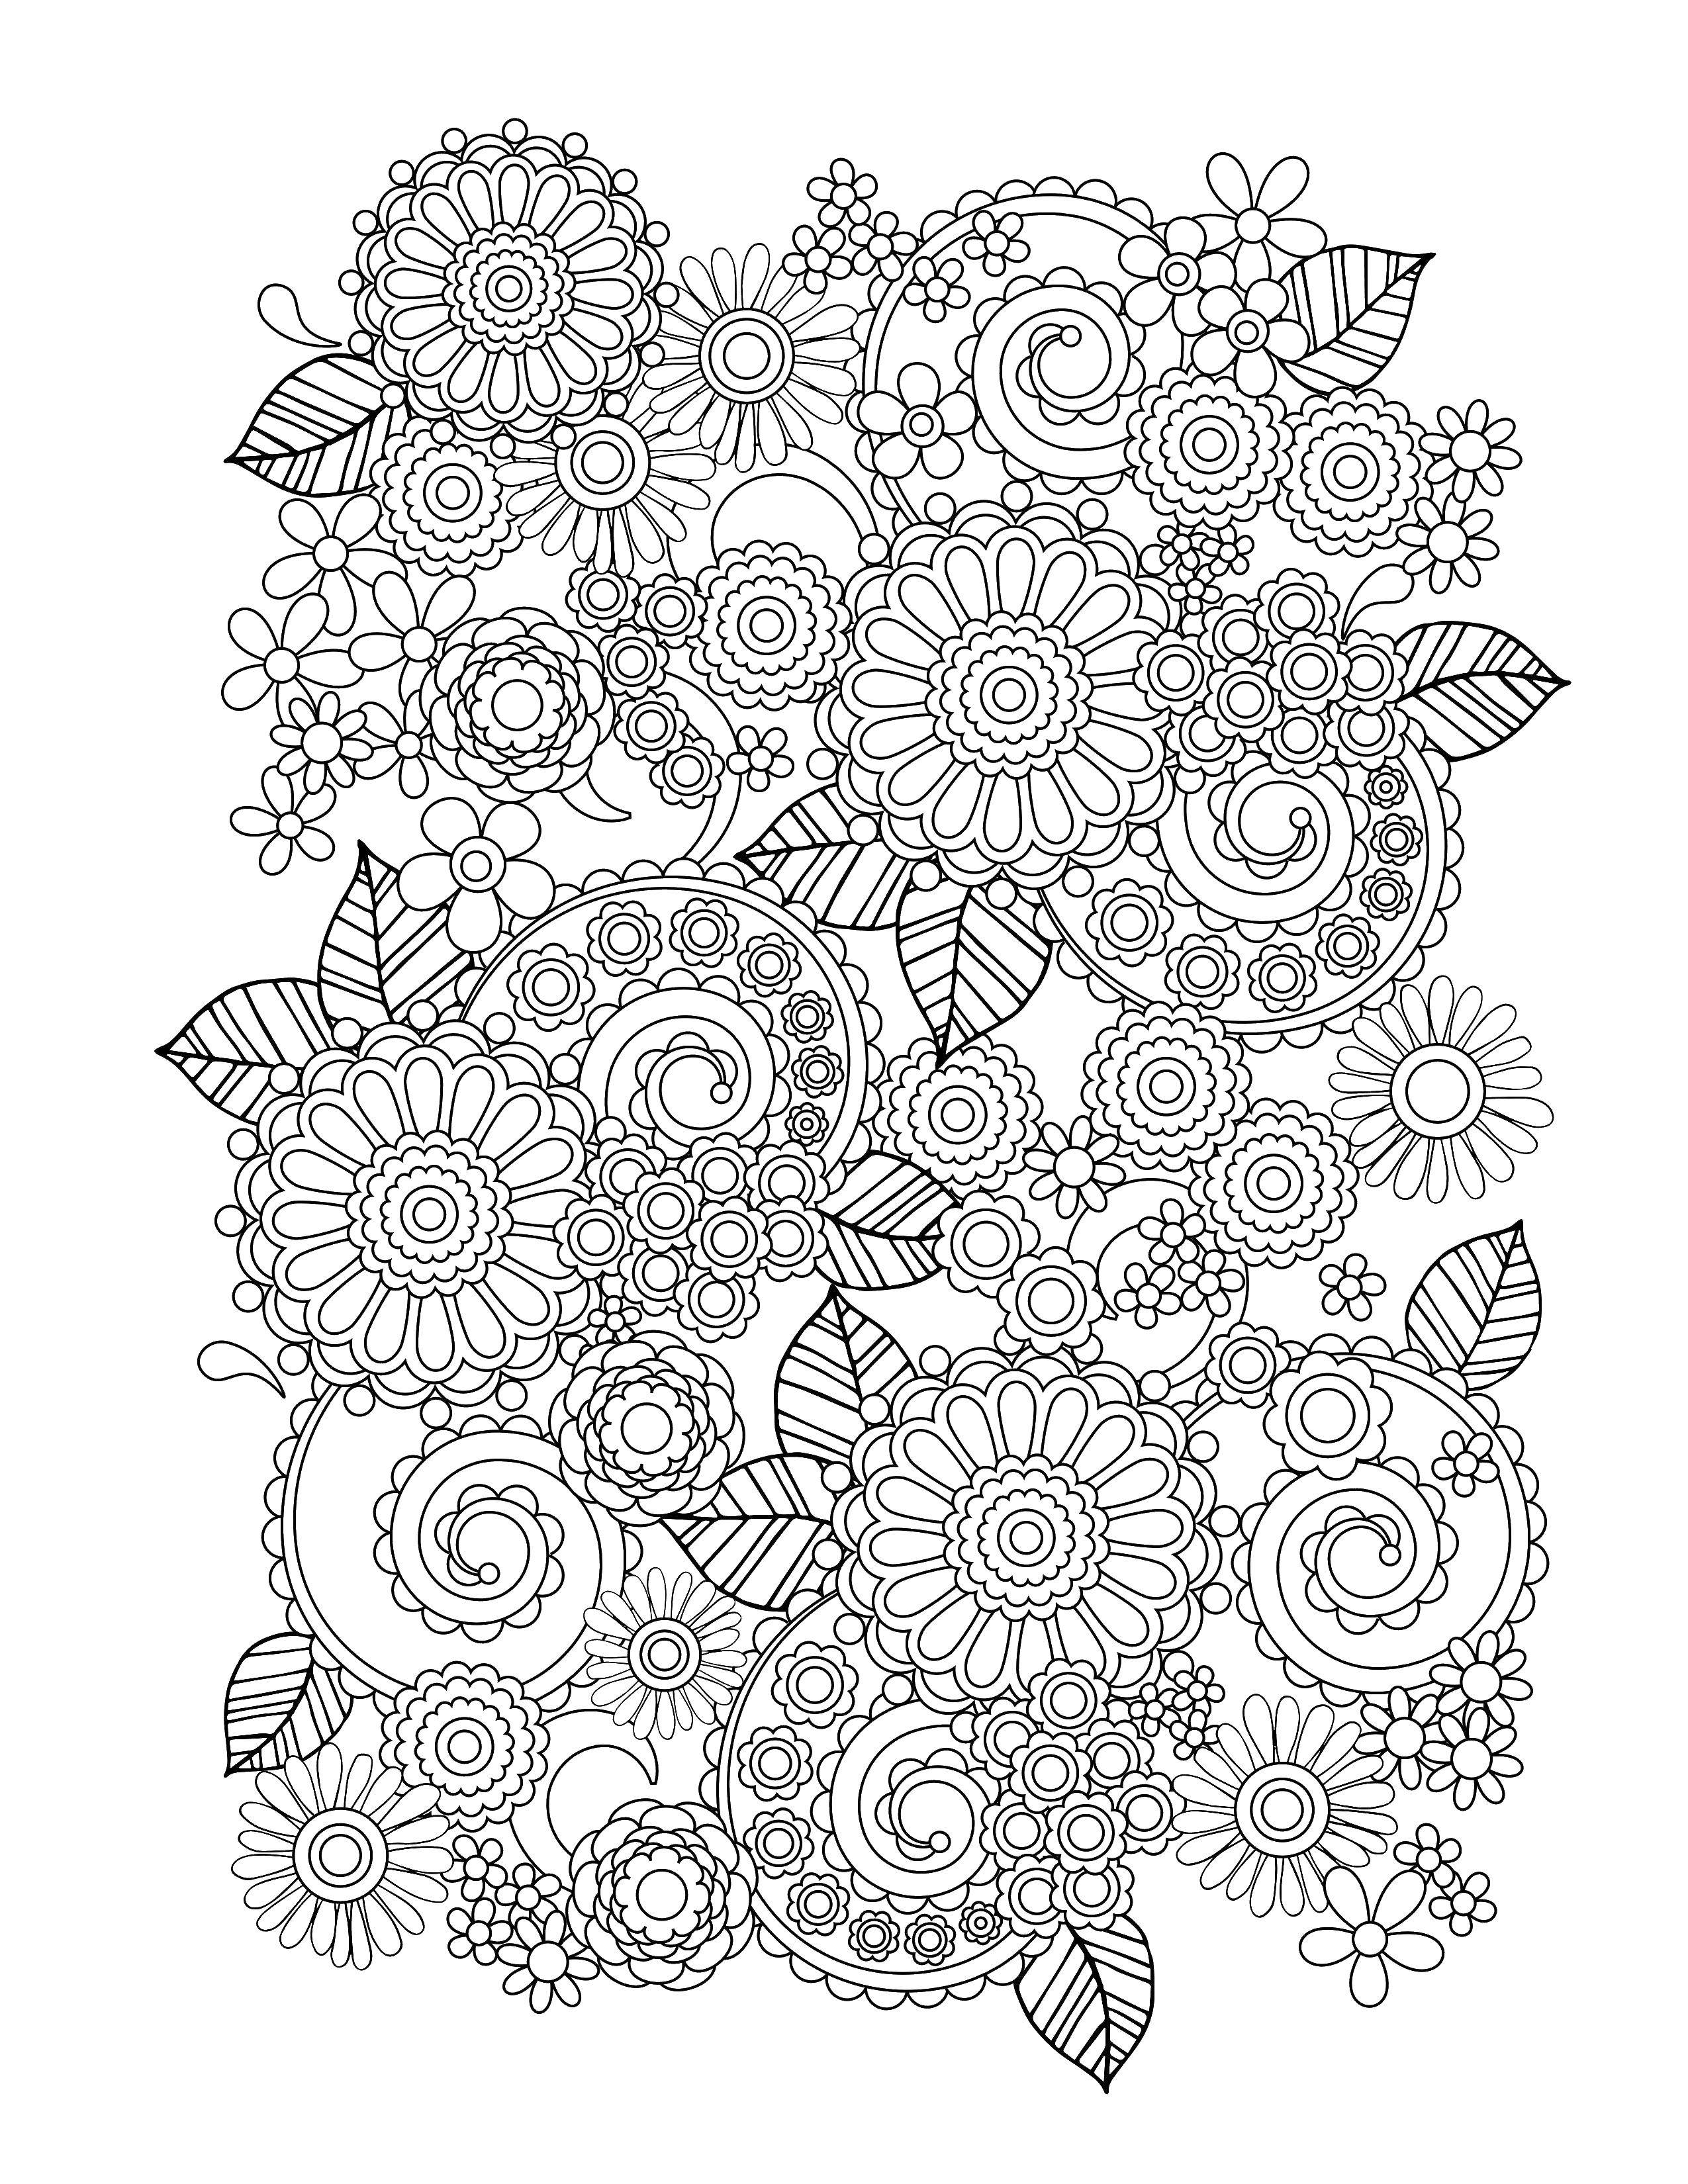 Coloring Flowers make up the pattern. Category Patterns. Tags:  patterns, flowers, anti-stress.